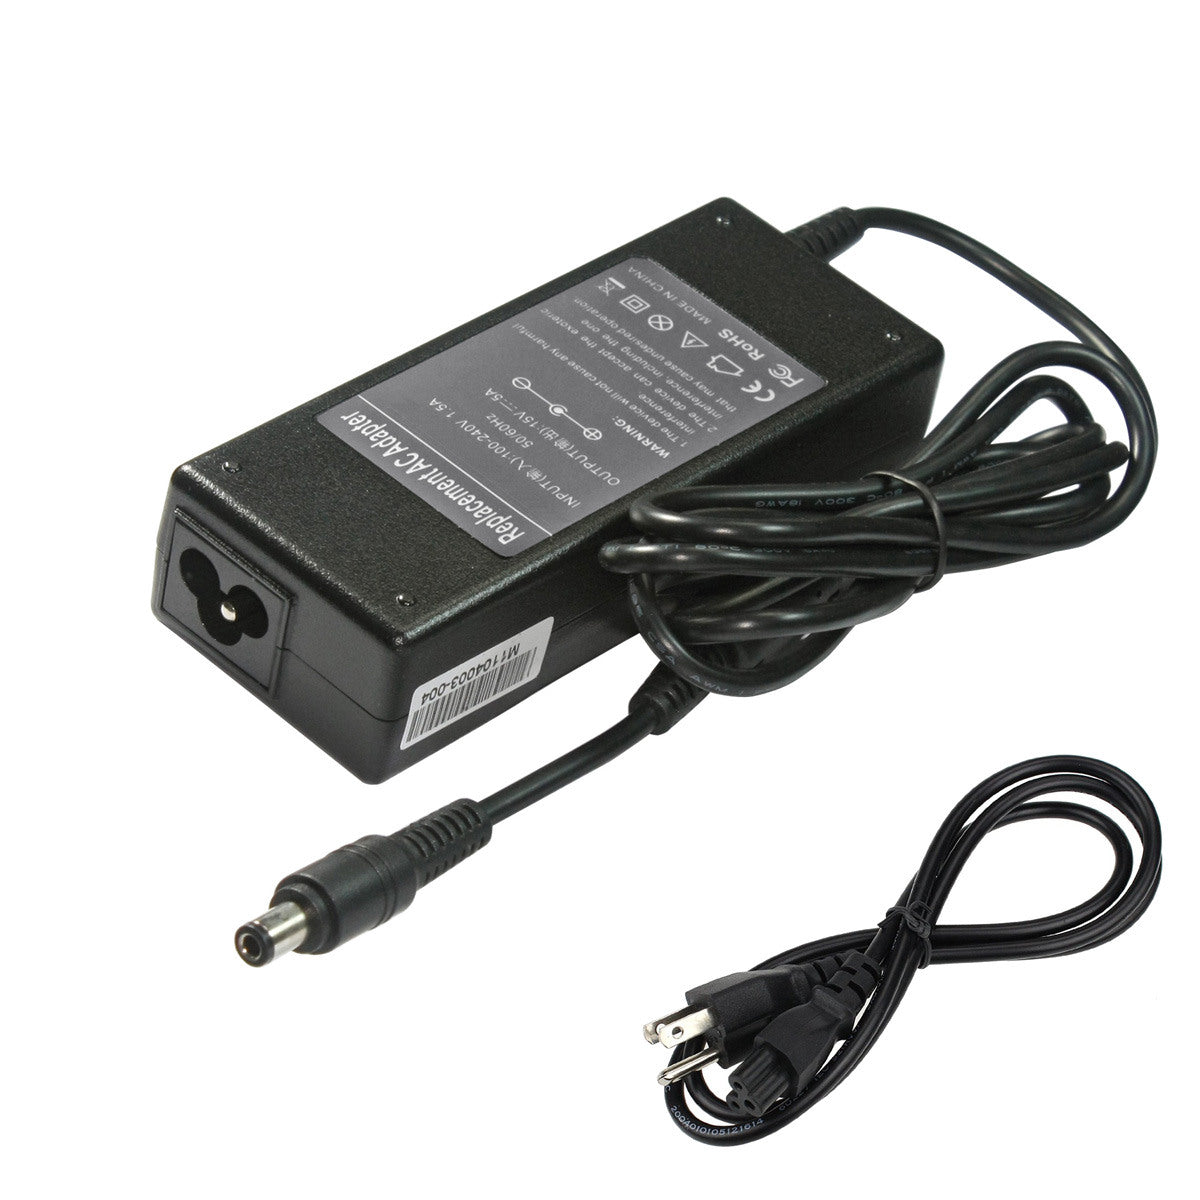 Compatible Replacement Toshiba Satellite M115-S3094 AC Adapter.